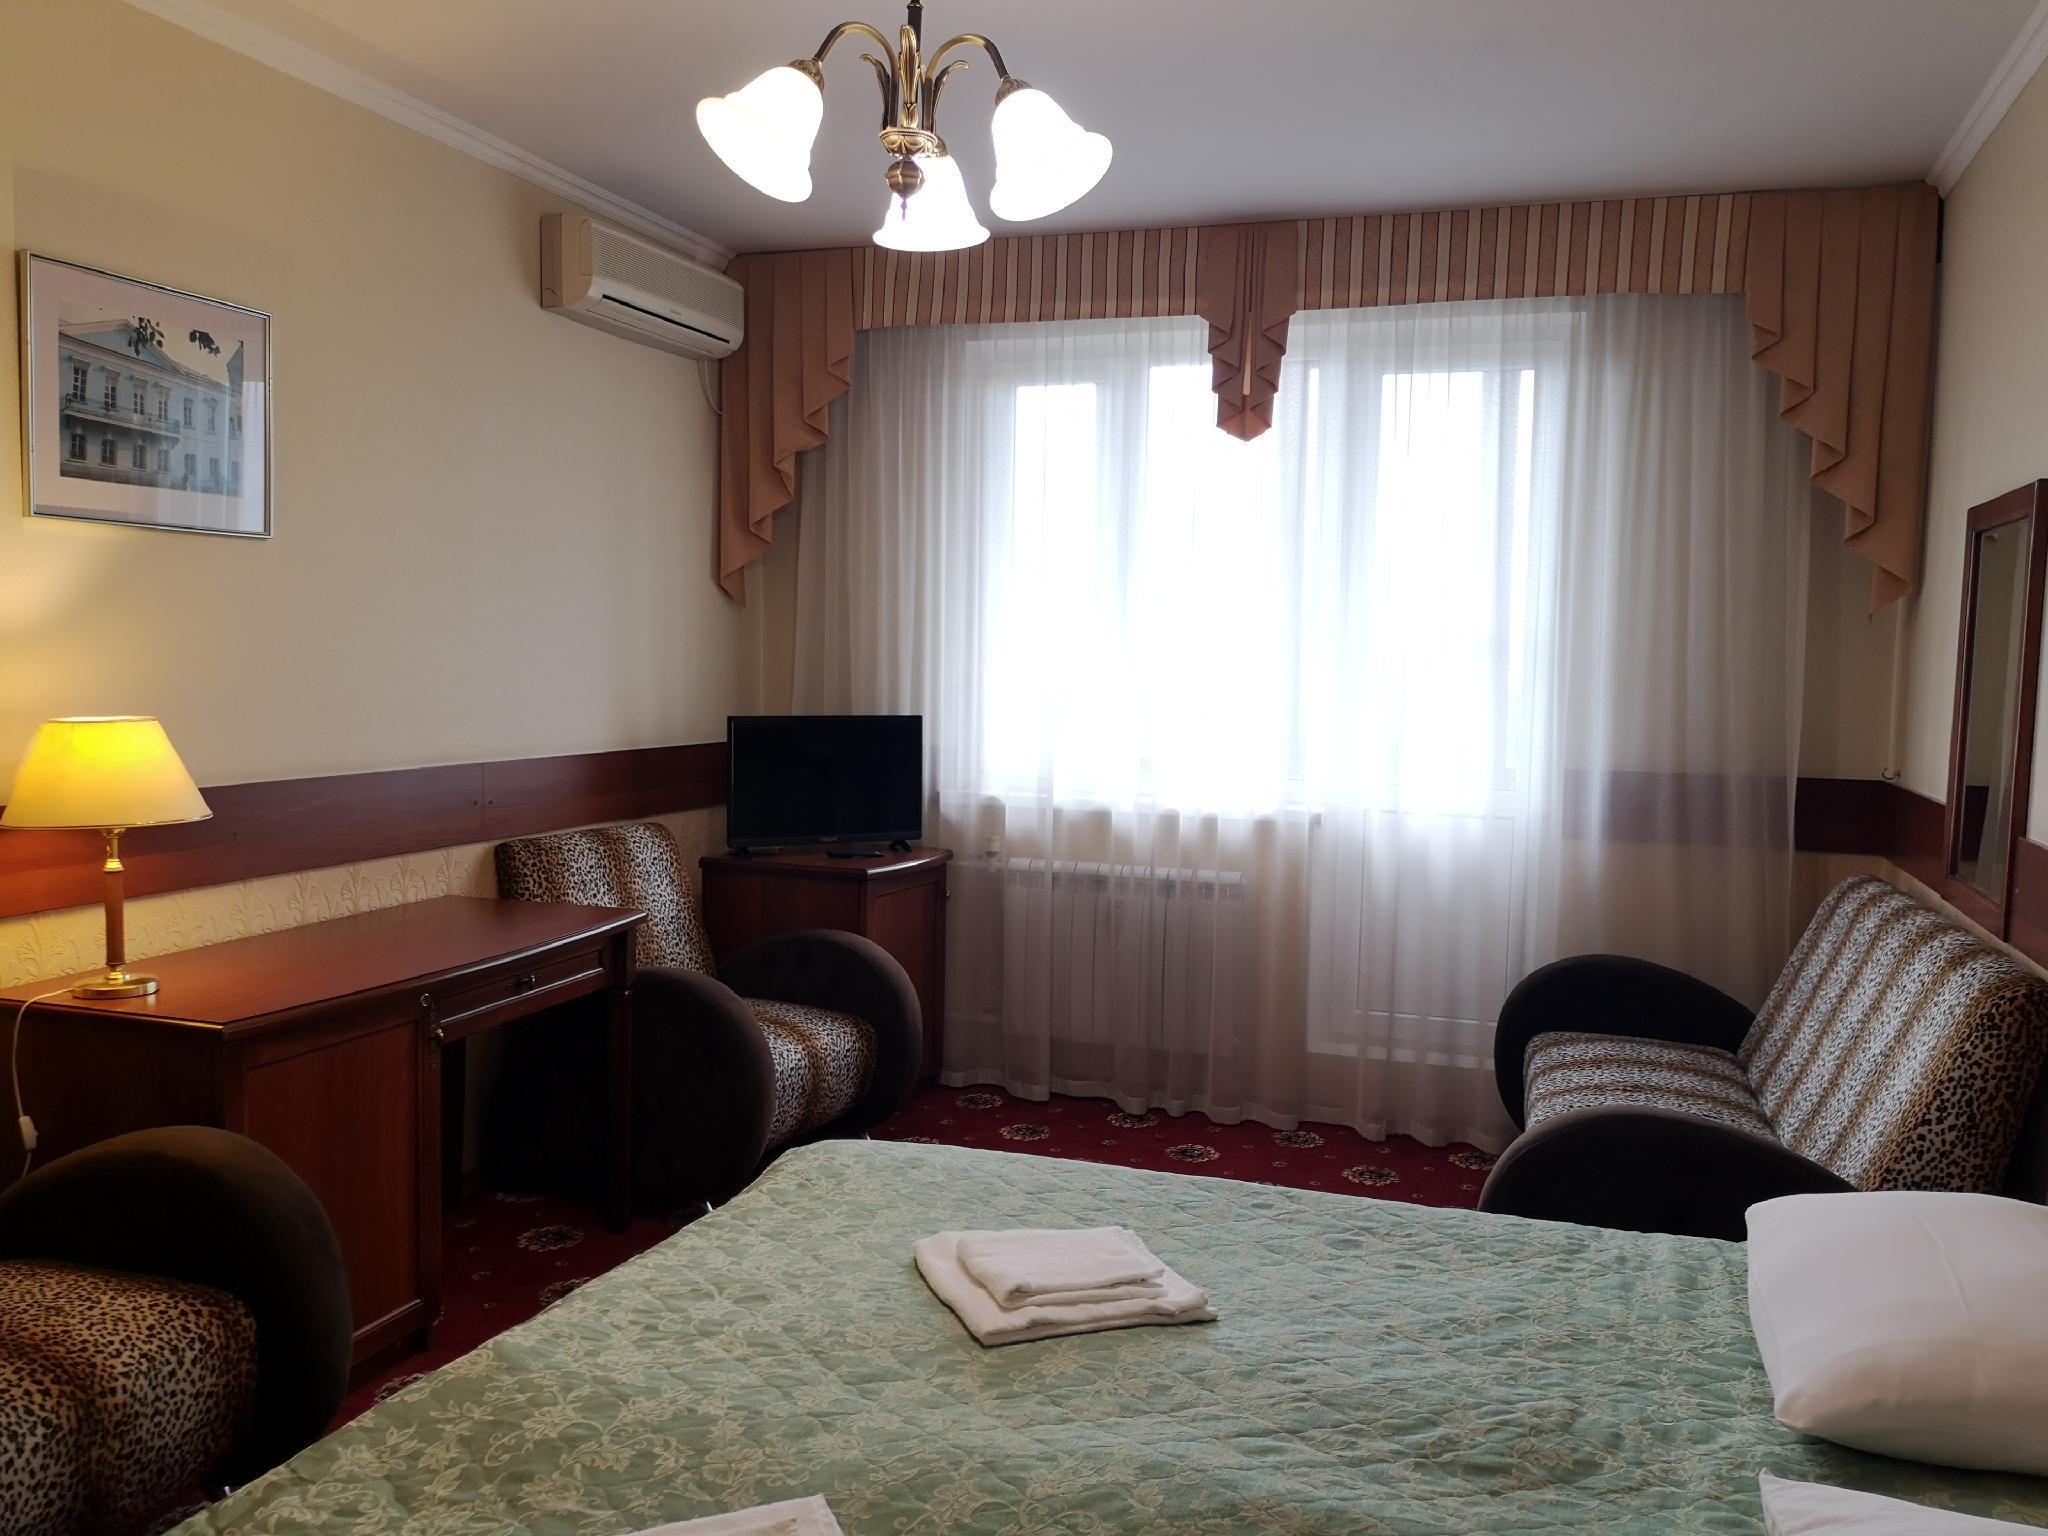 #55 Two Bed Rooms Apartments Park View - Moscou